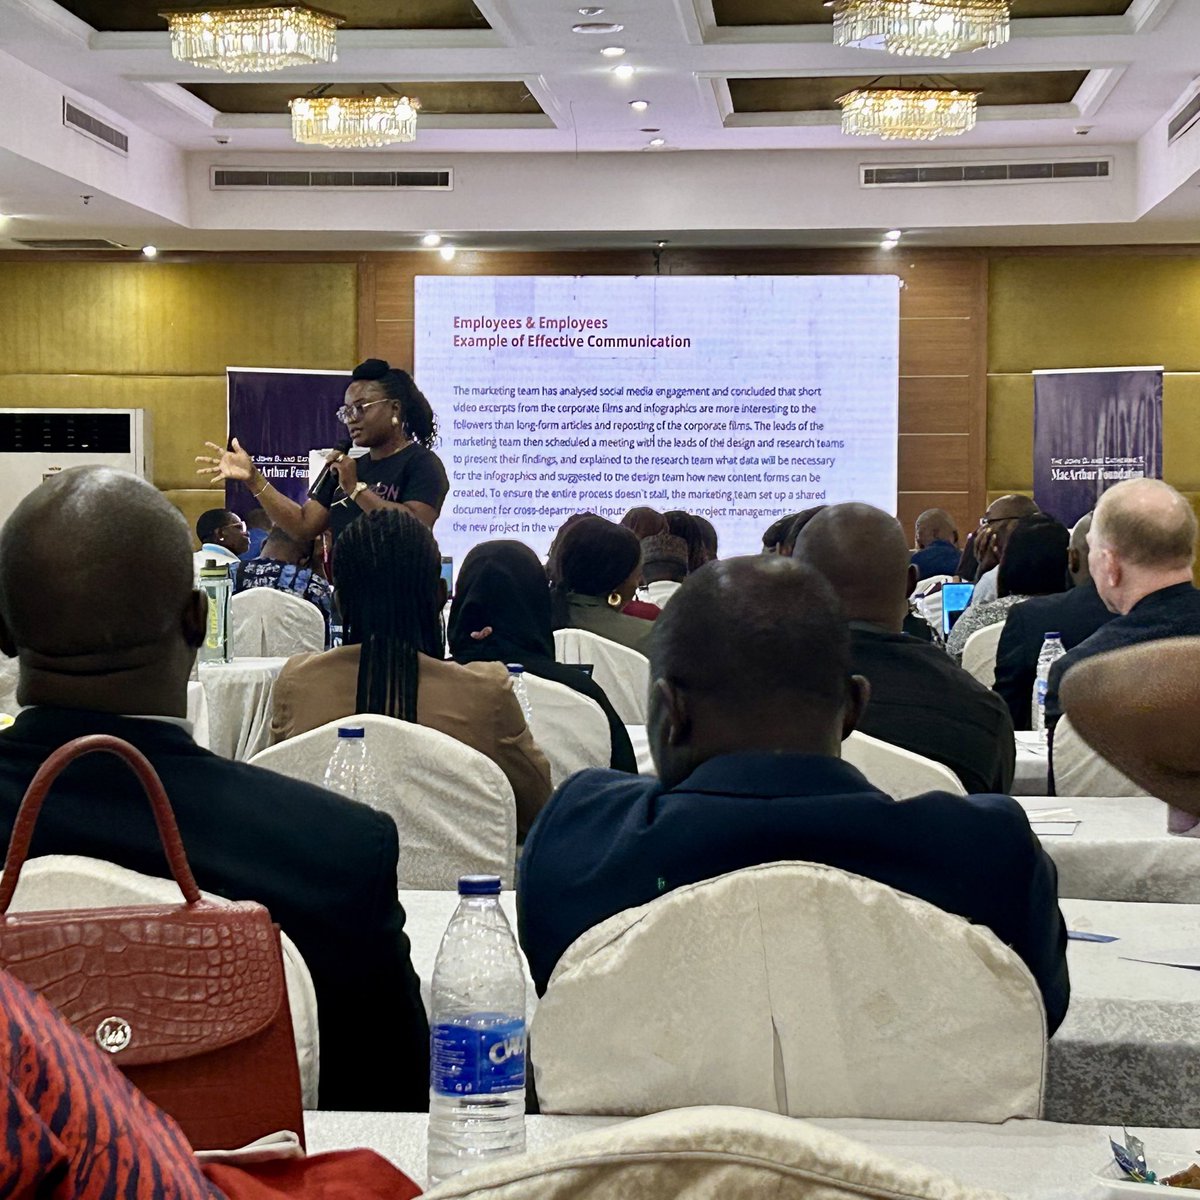 Last week, we joined other CSOs at the @macfound On Nigeria Communications training. The training provided insights into effective communication strategies, leadership skills, & leveraging AI tools for inclusive communications. Thank you @macfound for the amazing session!